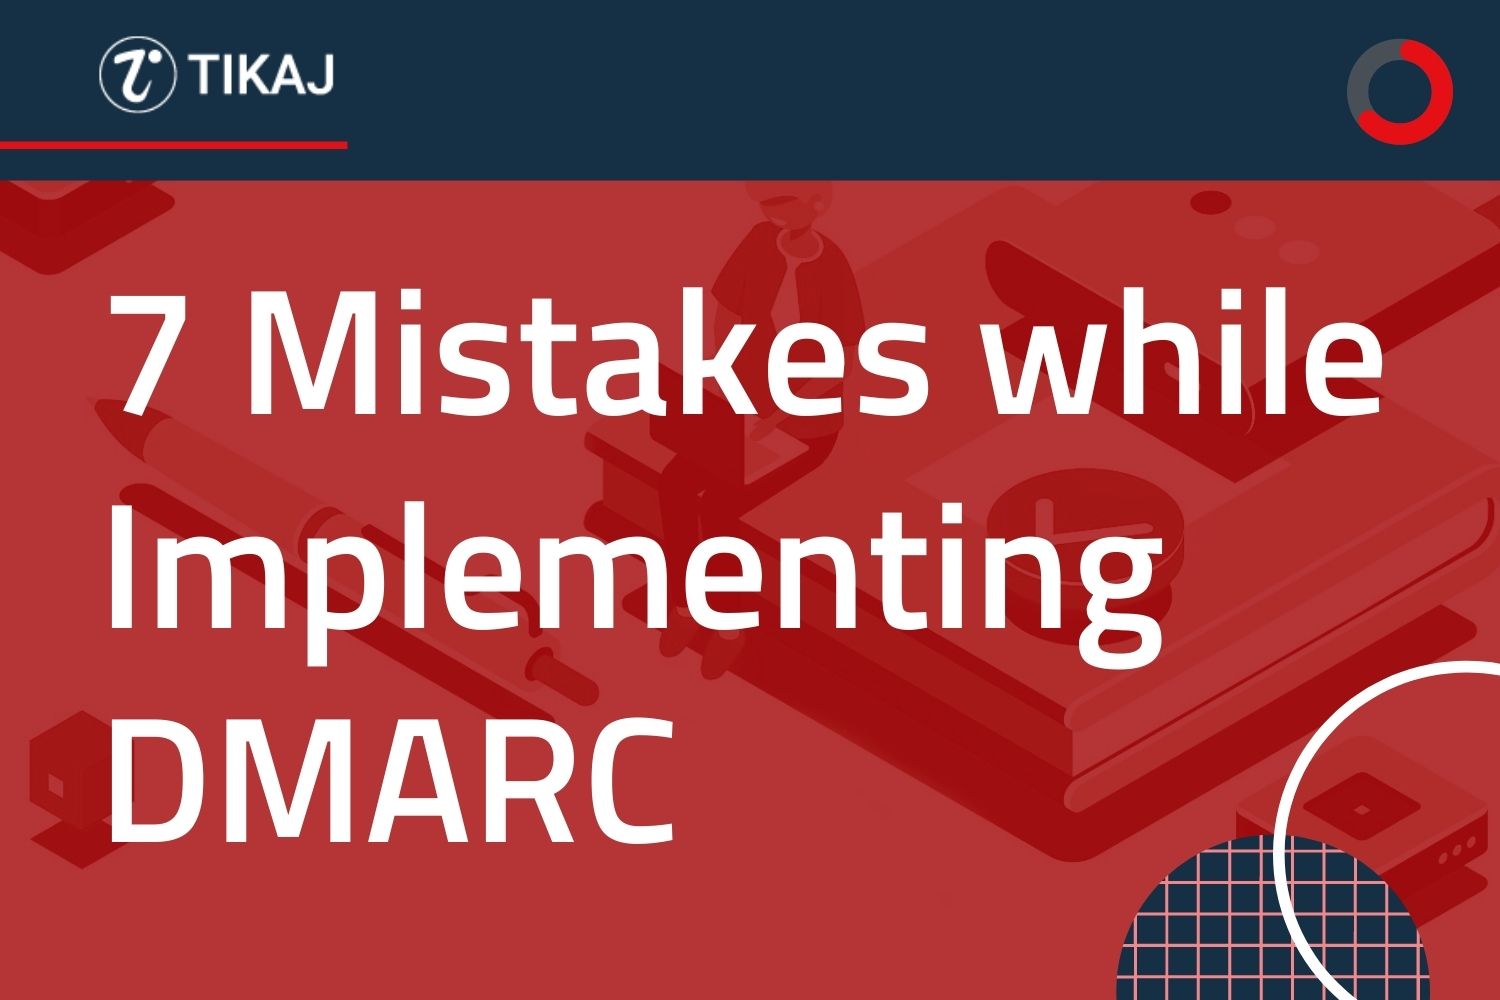 DMARC: 7 Mistakes while Implementing DMARC